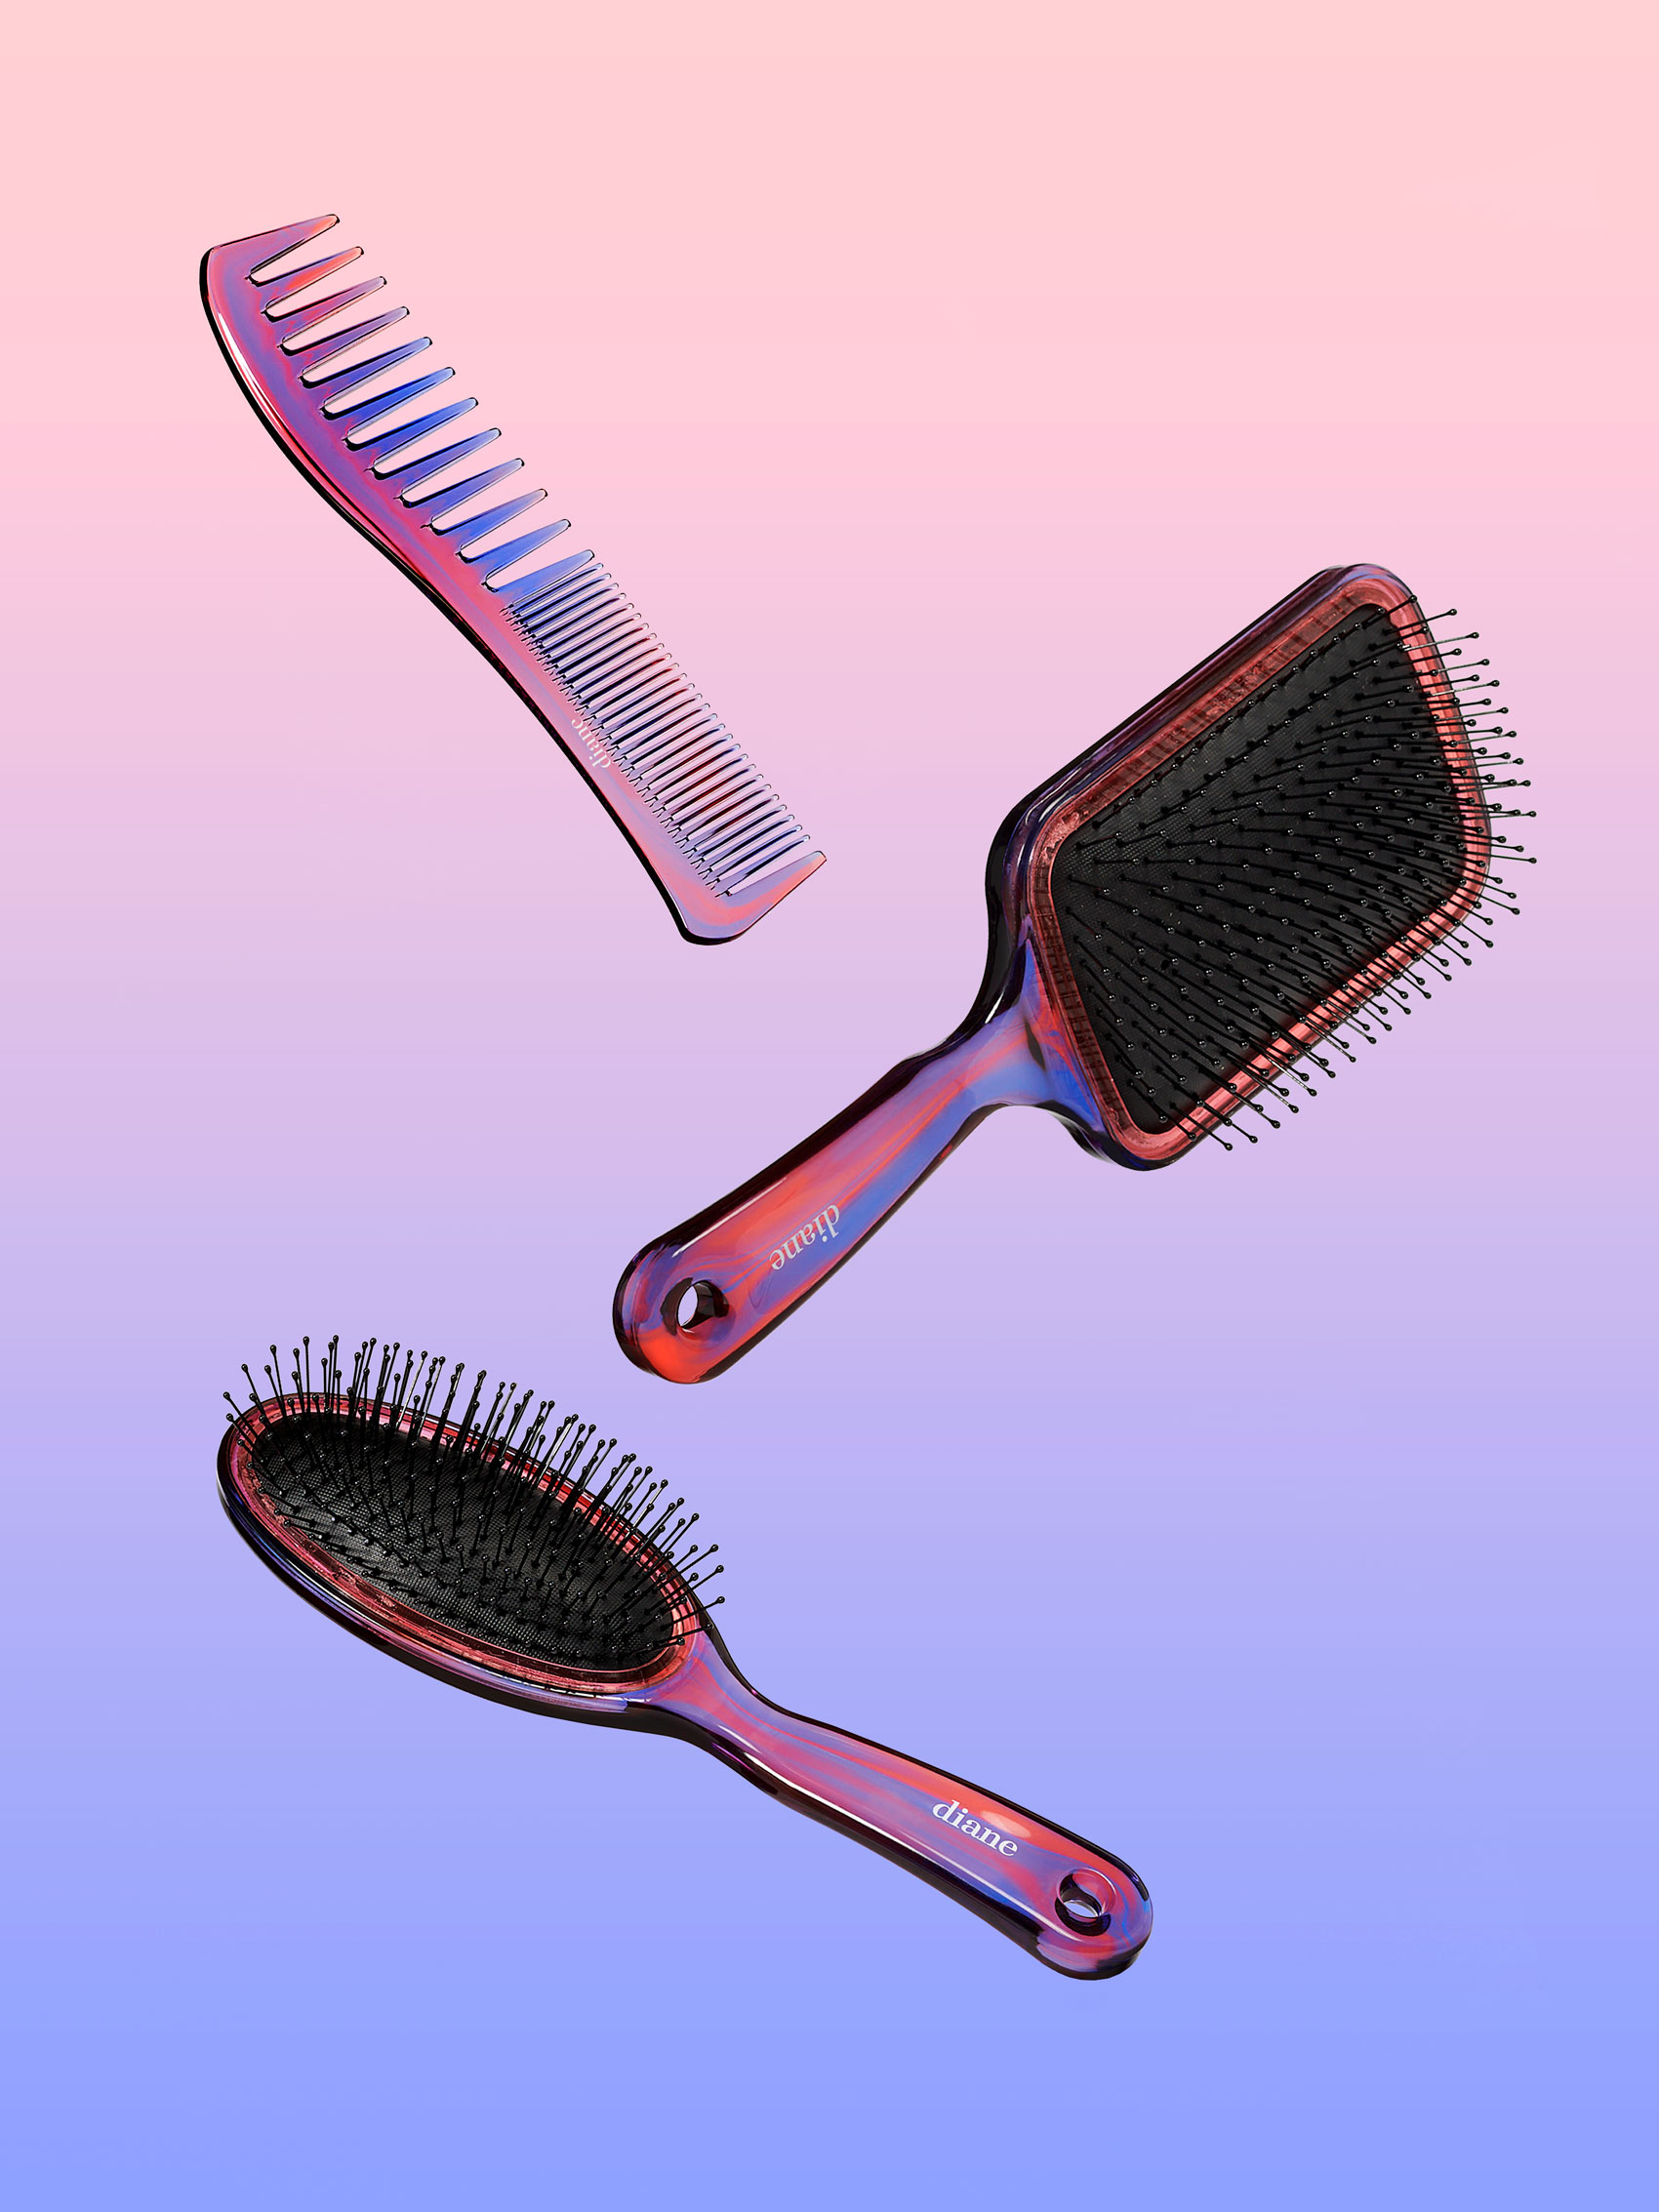 Comb and two paddle brushes suspended in air on pink and purple gradient